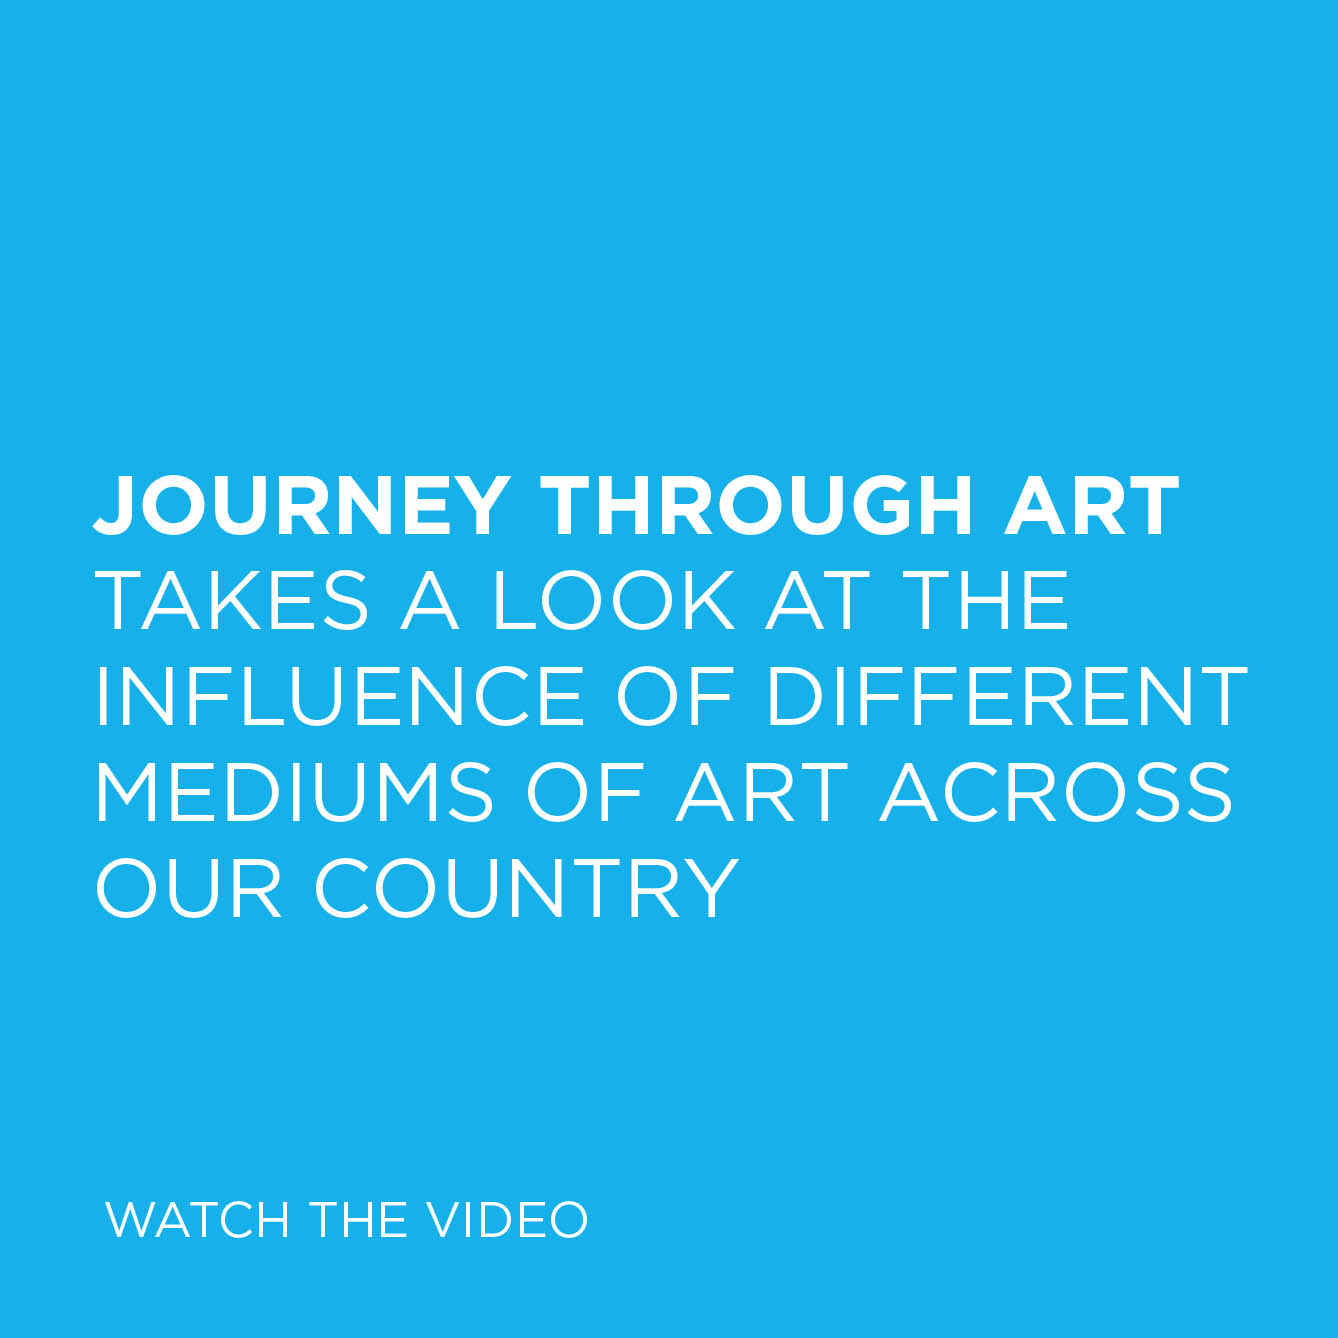 Journey Through Art takes a look at the influence of different mediums of art across our country – watch the video